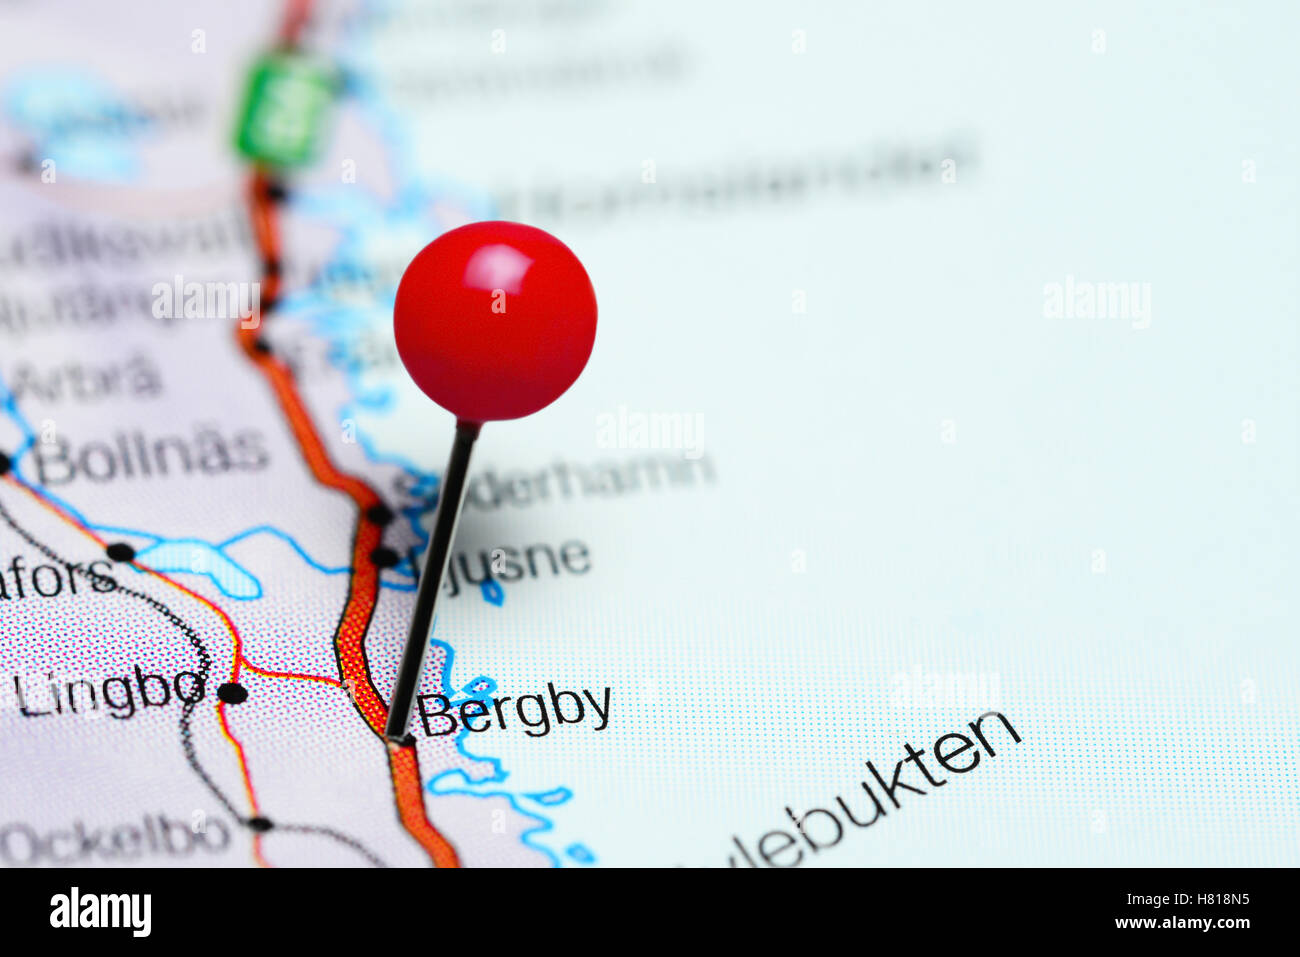 Bergby pinned on a map of Sweden Stock Photo